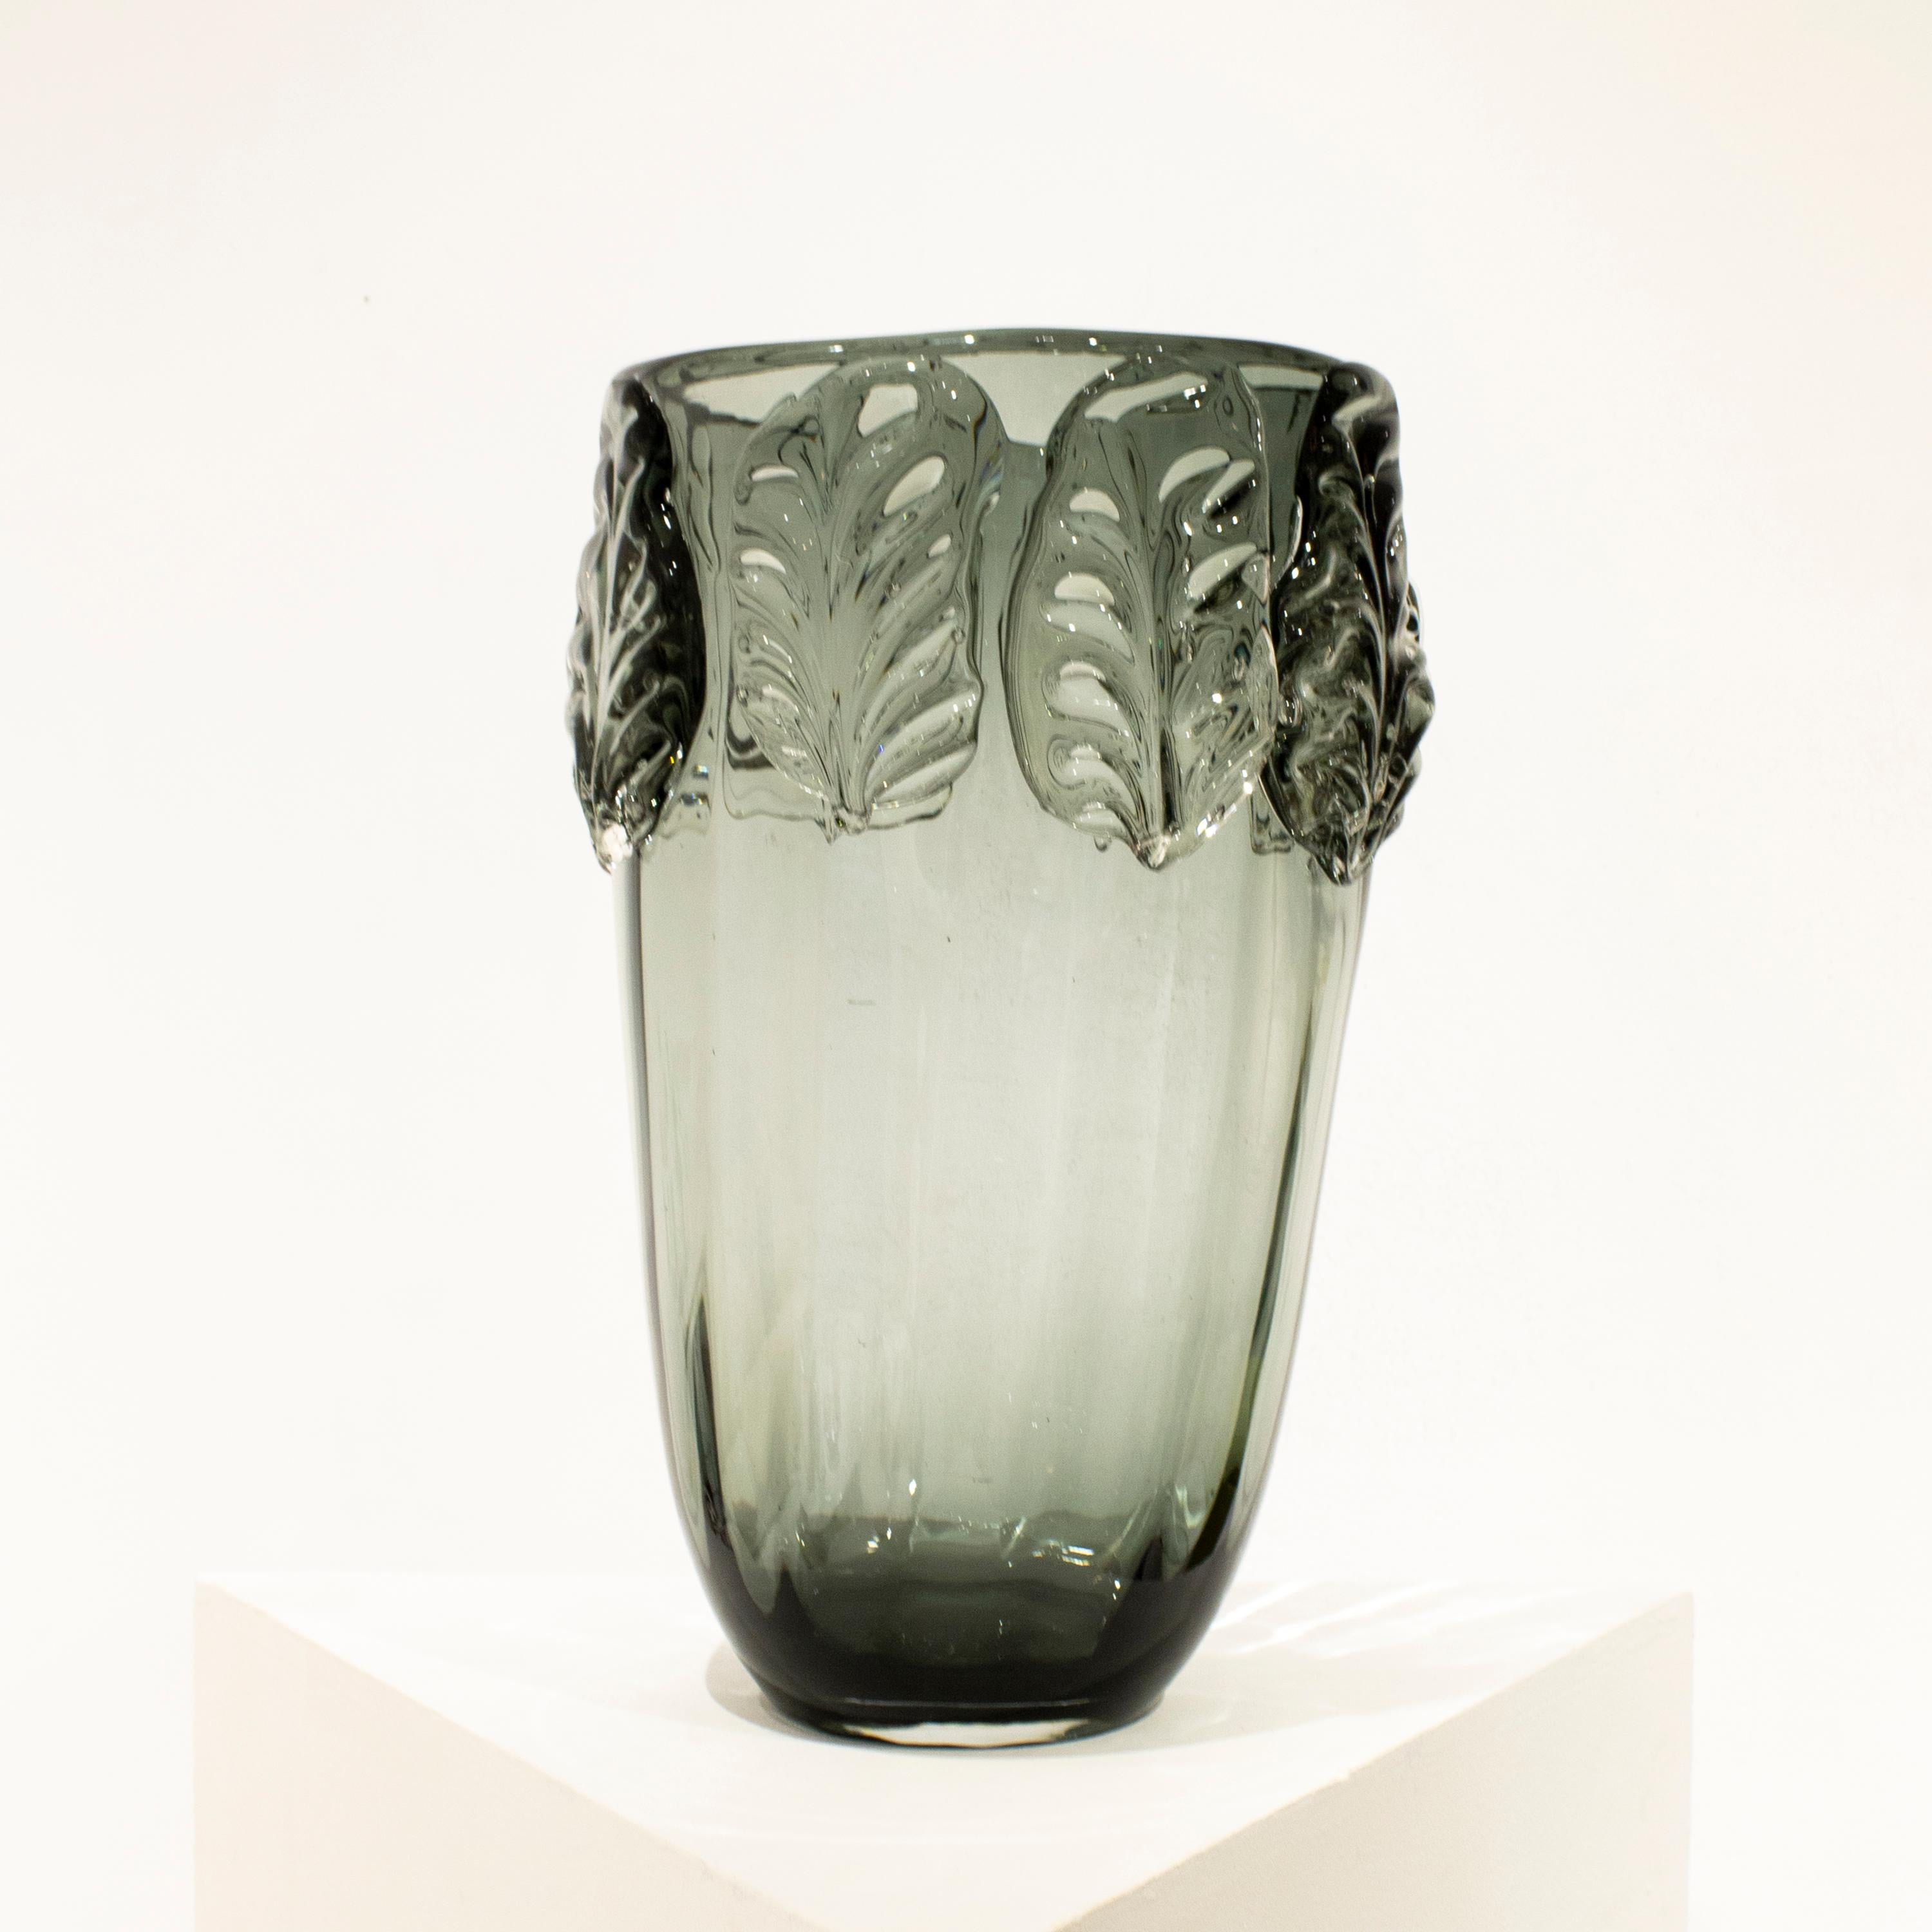 Hand-blown Italian grey semi-transparent glass vase, with organic shapes and plant motifs. 